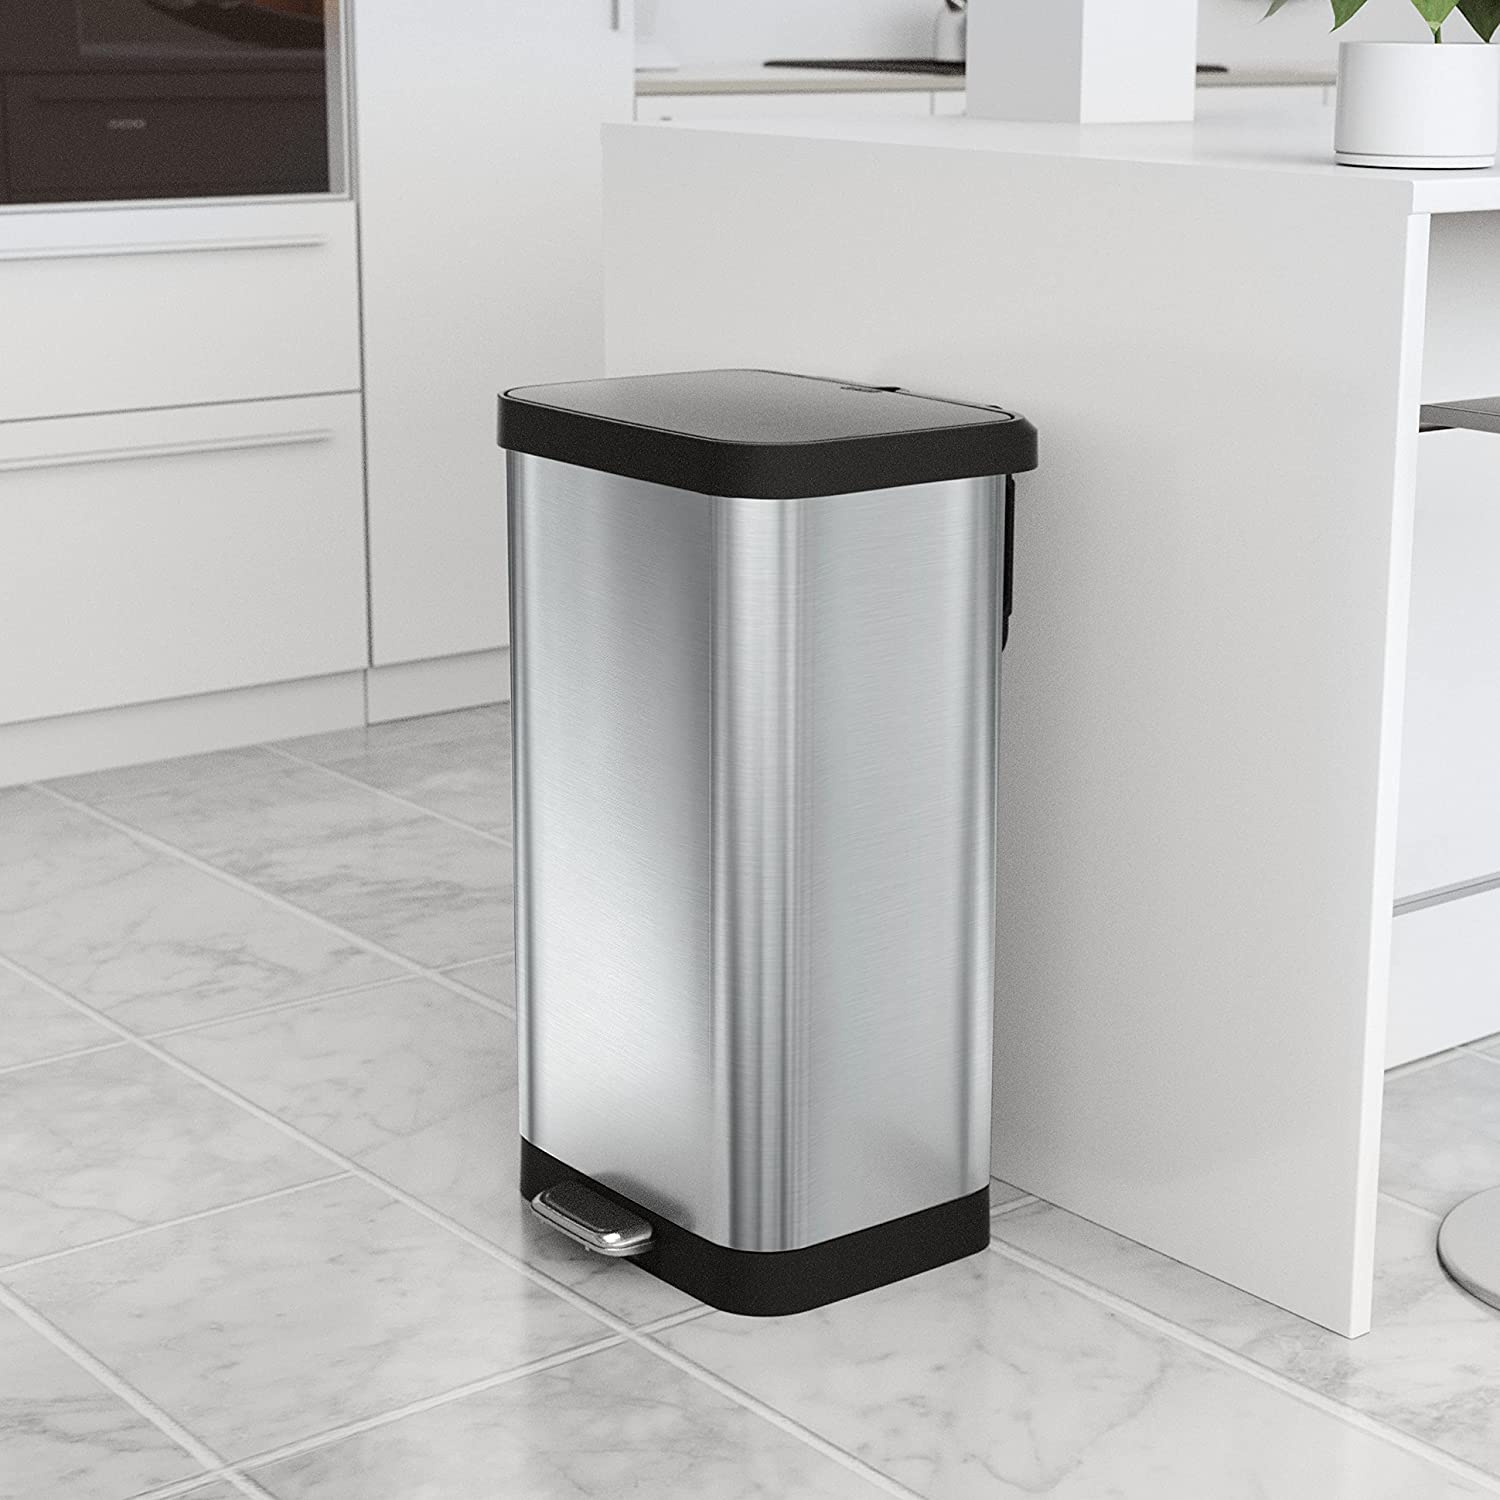 https://bigbigmart.com/wp-content/uploads/2023/05/Glad-Stainless-Steel-Step-Trash-Can-with-Clorox-Odor-Protection-Large-Metal-Kitchen-Garbage-Bin-with-Soft-Close-Lid-Foot-Pedal-and-Waste-Bag-Roll-Holder-20-Gallon-Stainless4.jpg